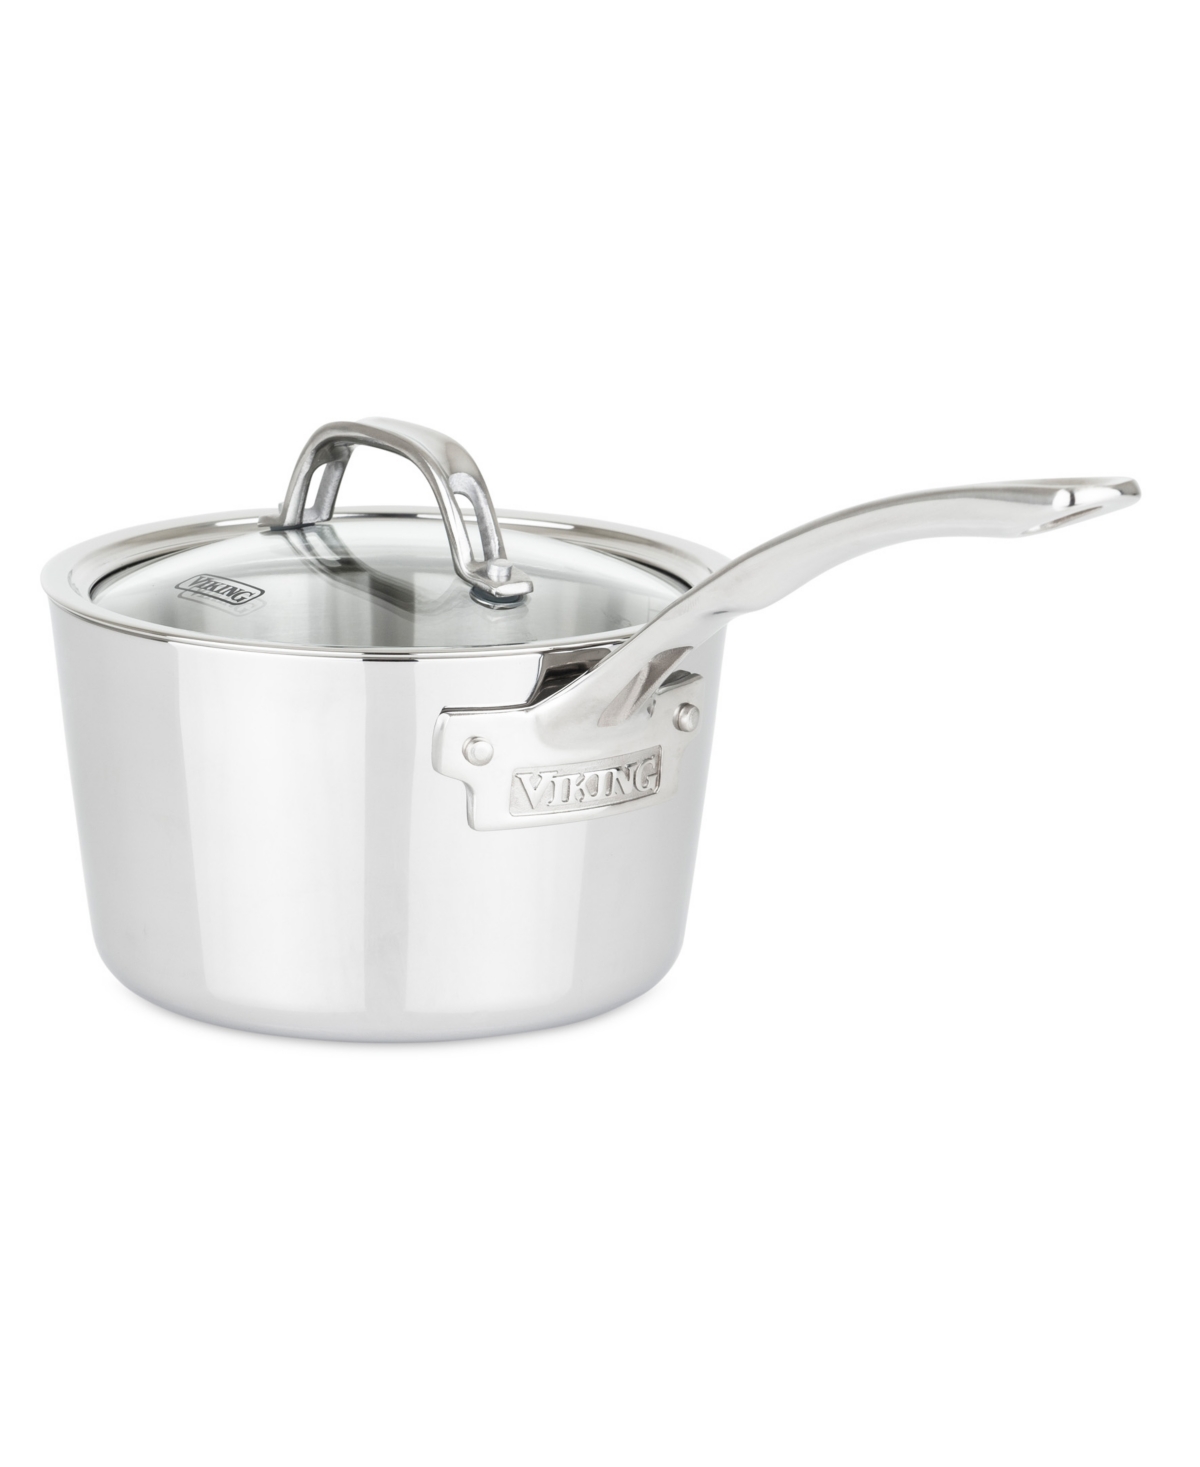 Viking Contemporary 3-ply Stainless Steel 2.4-quart Sauce Pan With Glass Lid